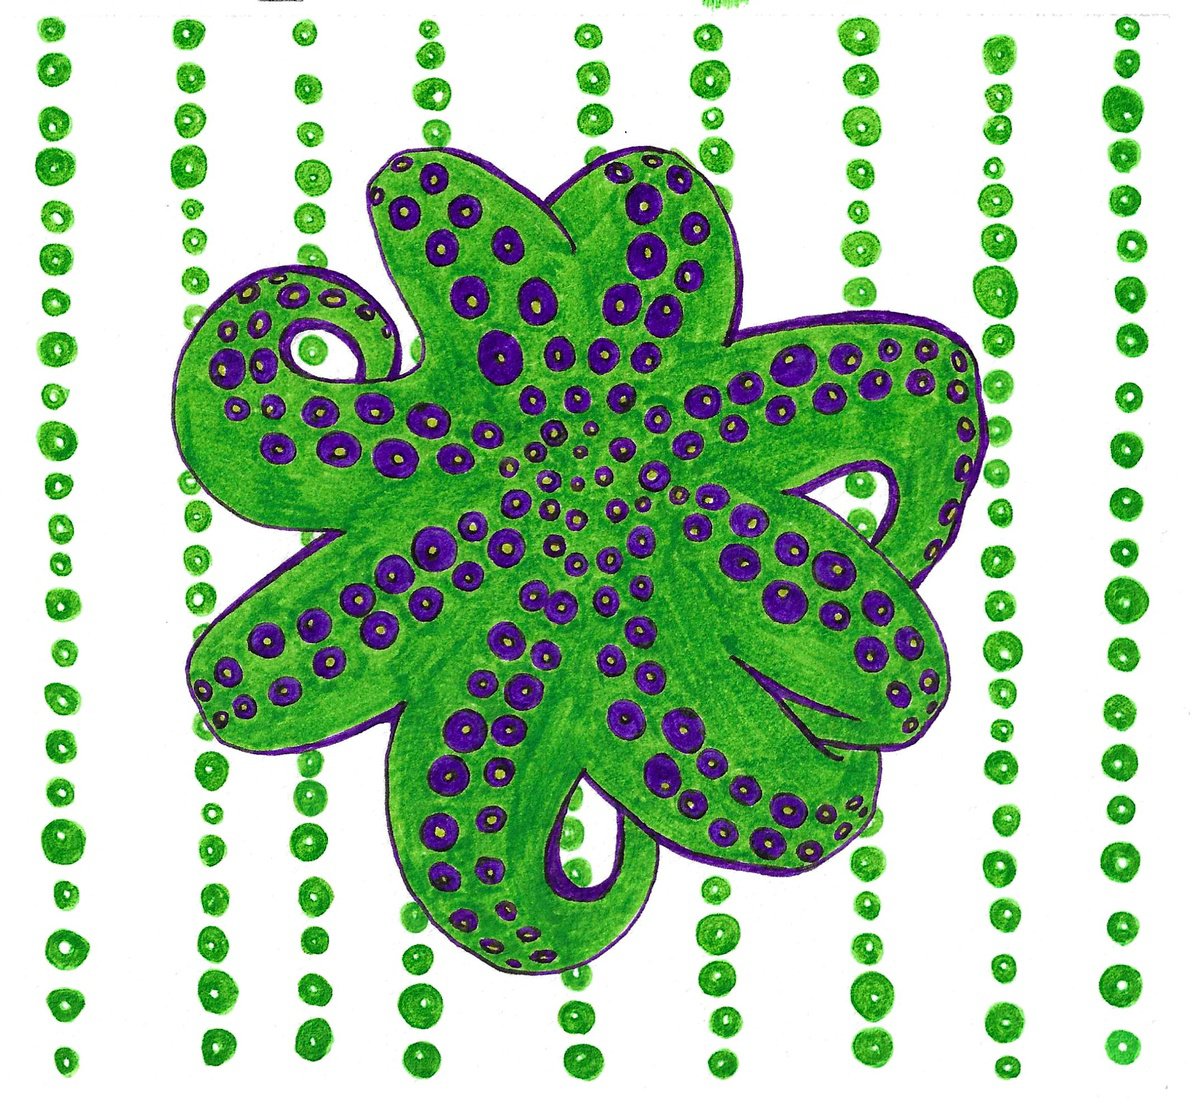 Green octopus by Andromachi Giannopoulou